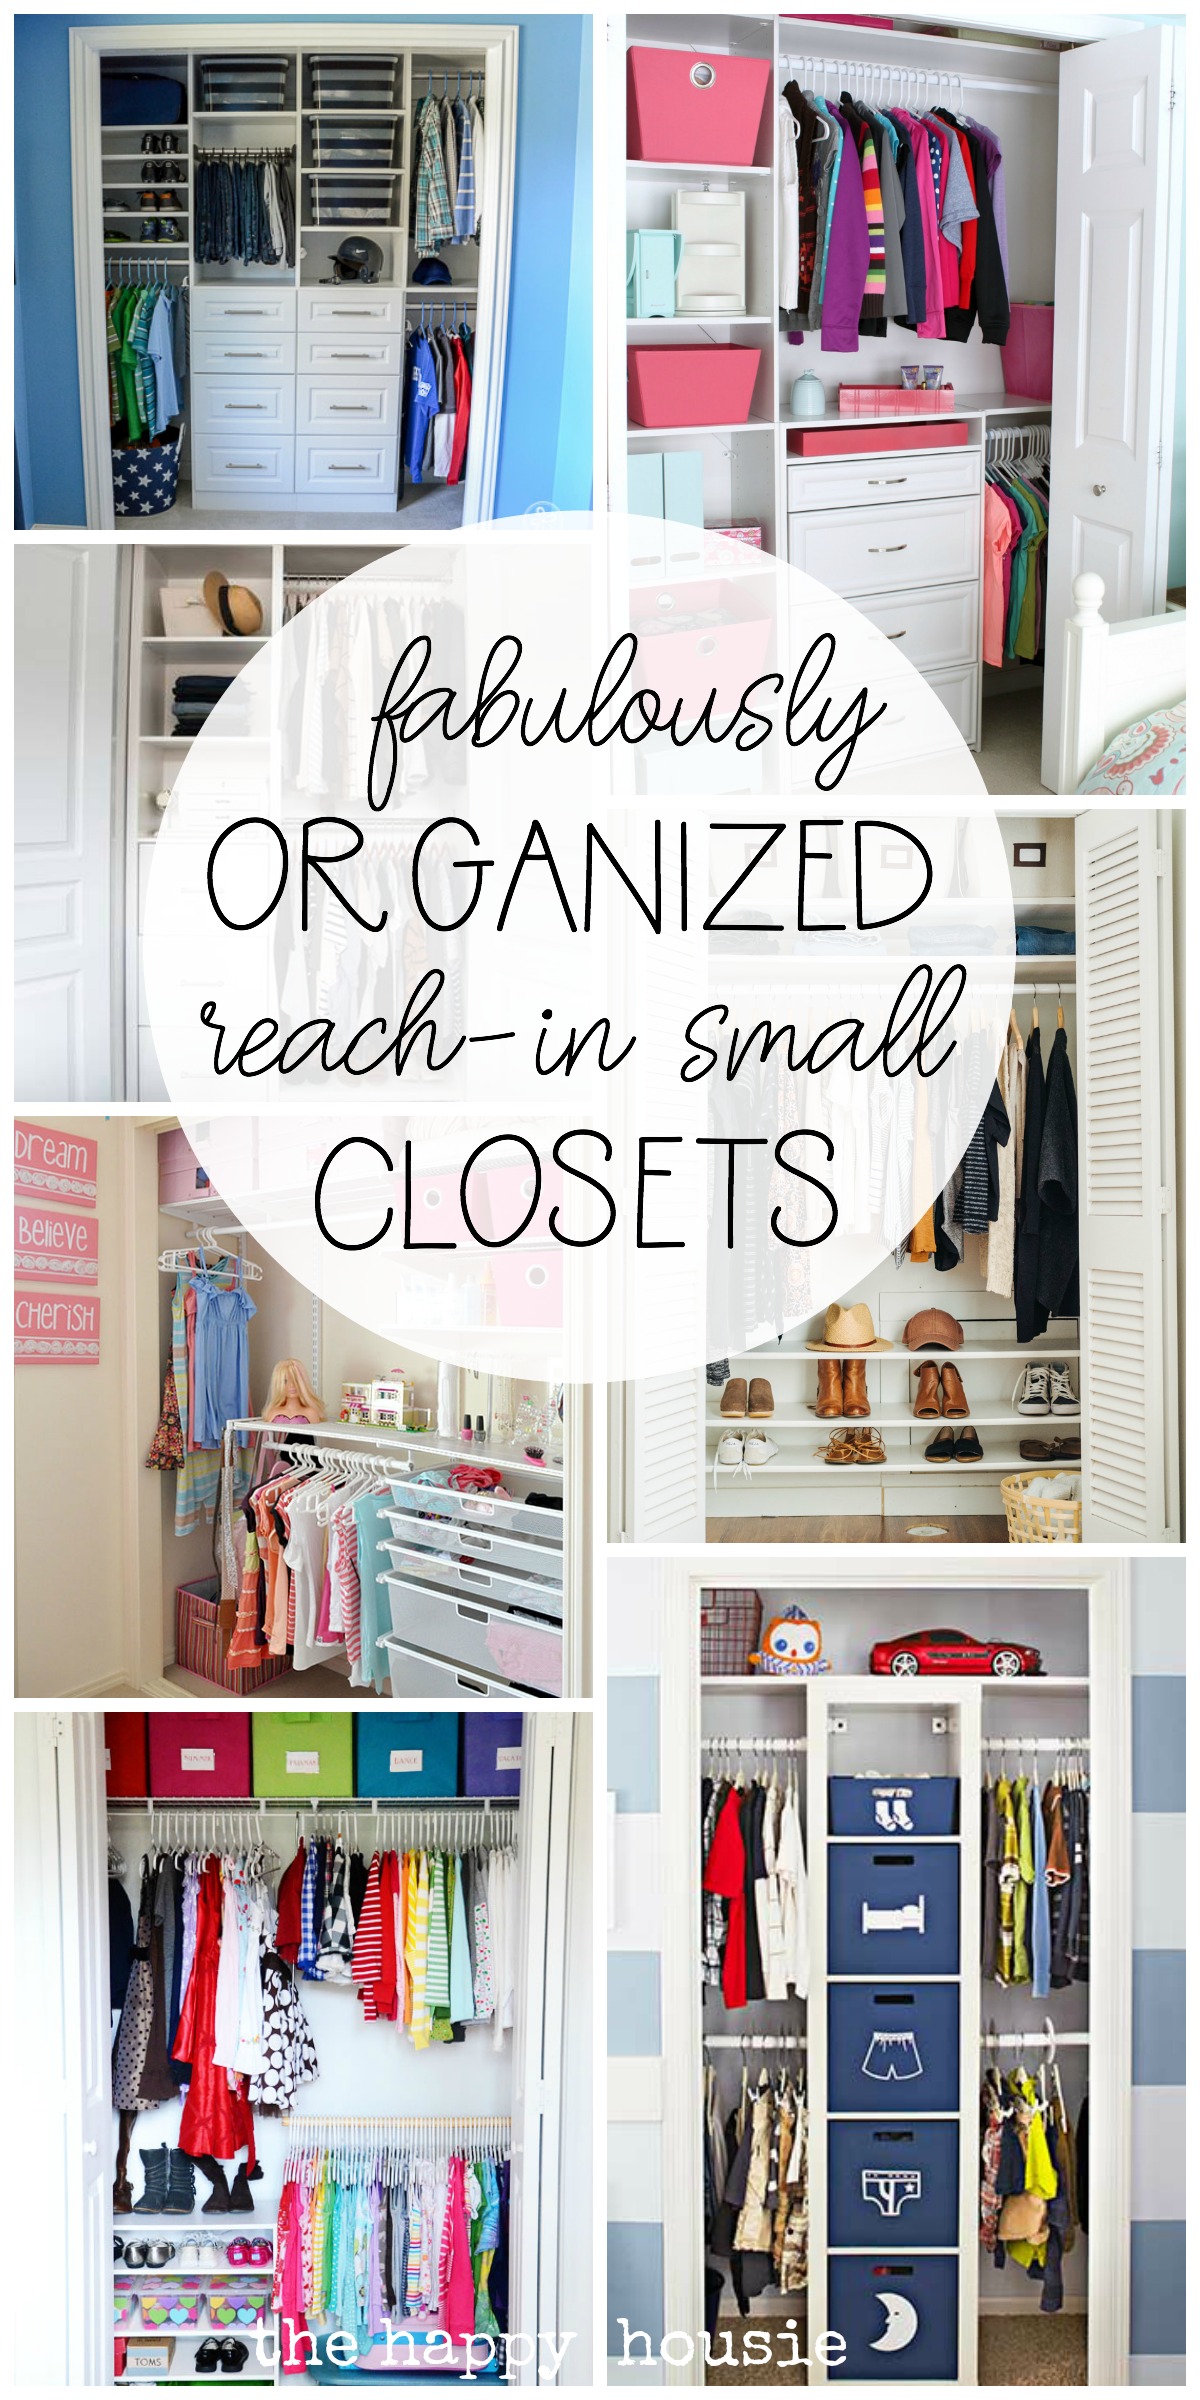 https://www.thehappyhousie.com/wp-content/uploads/2018/01/fabulously-organized-reach-in-small-closets-.jpg